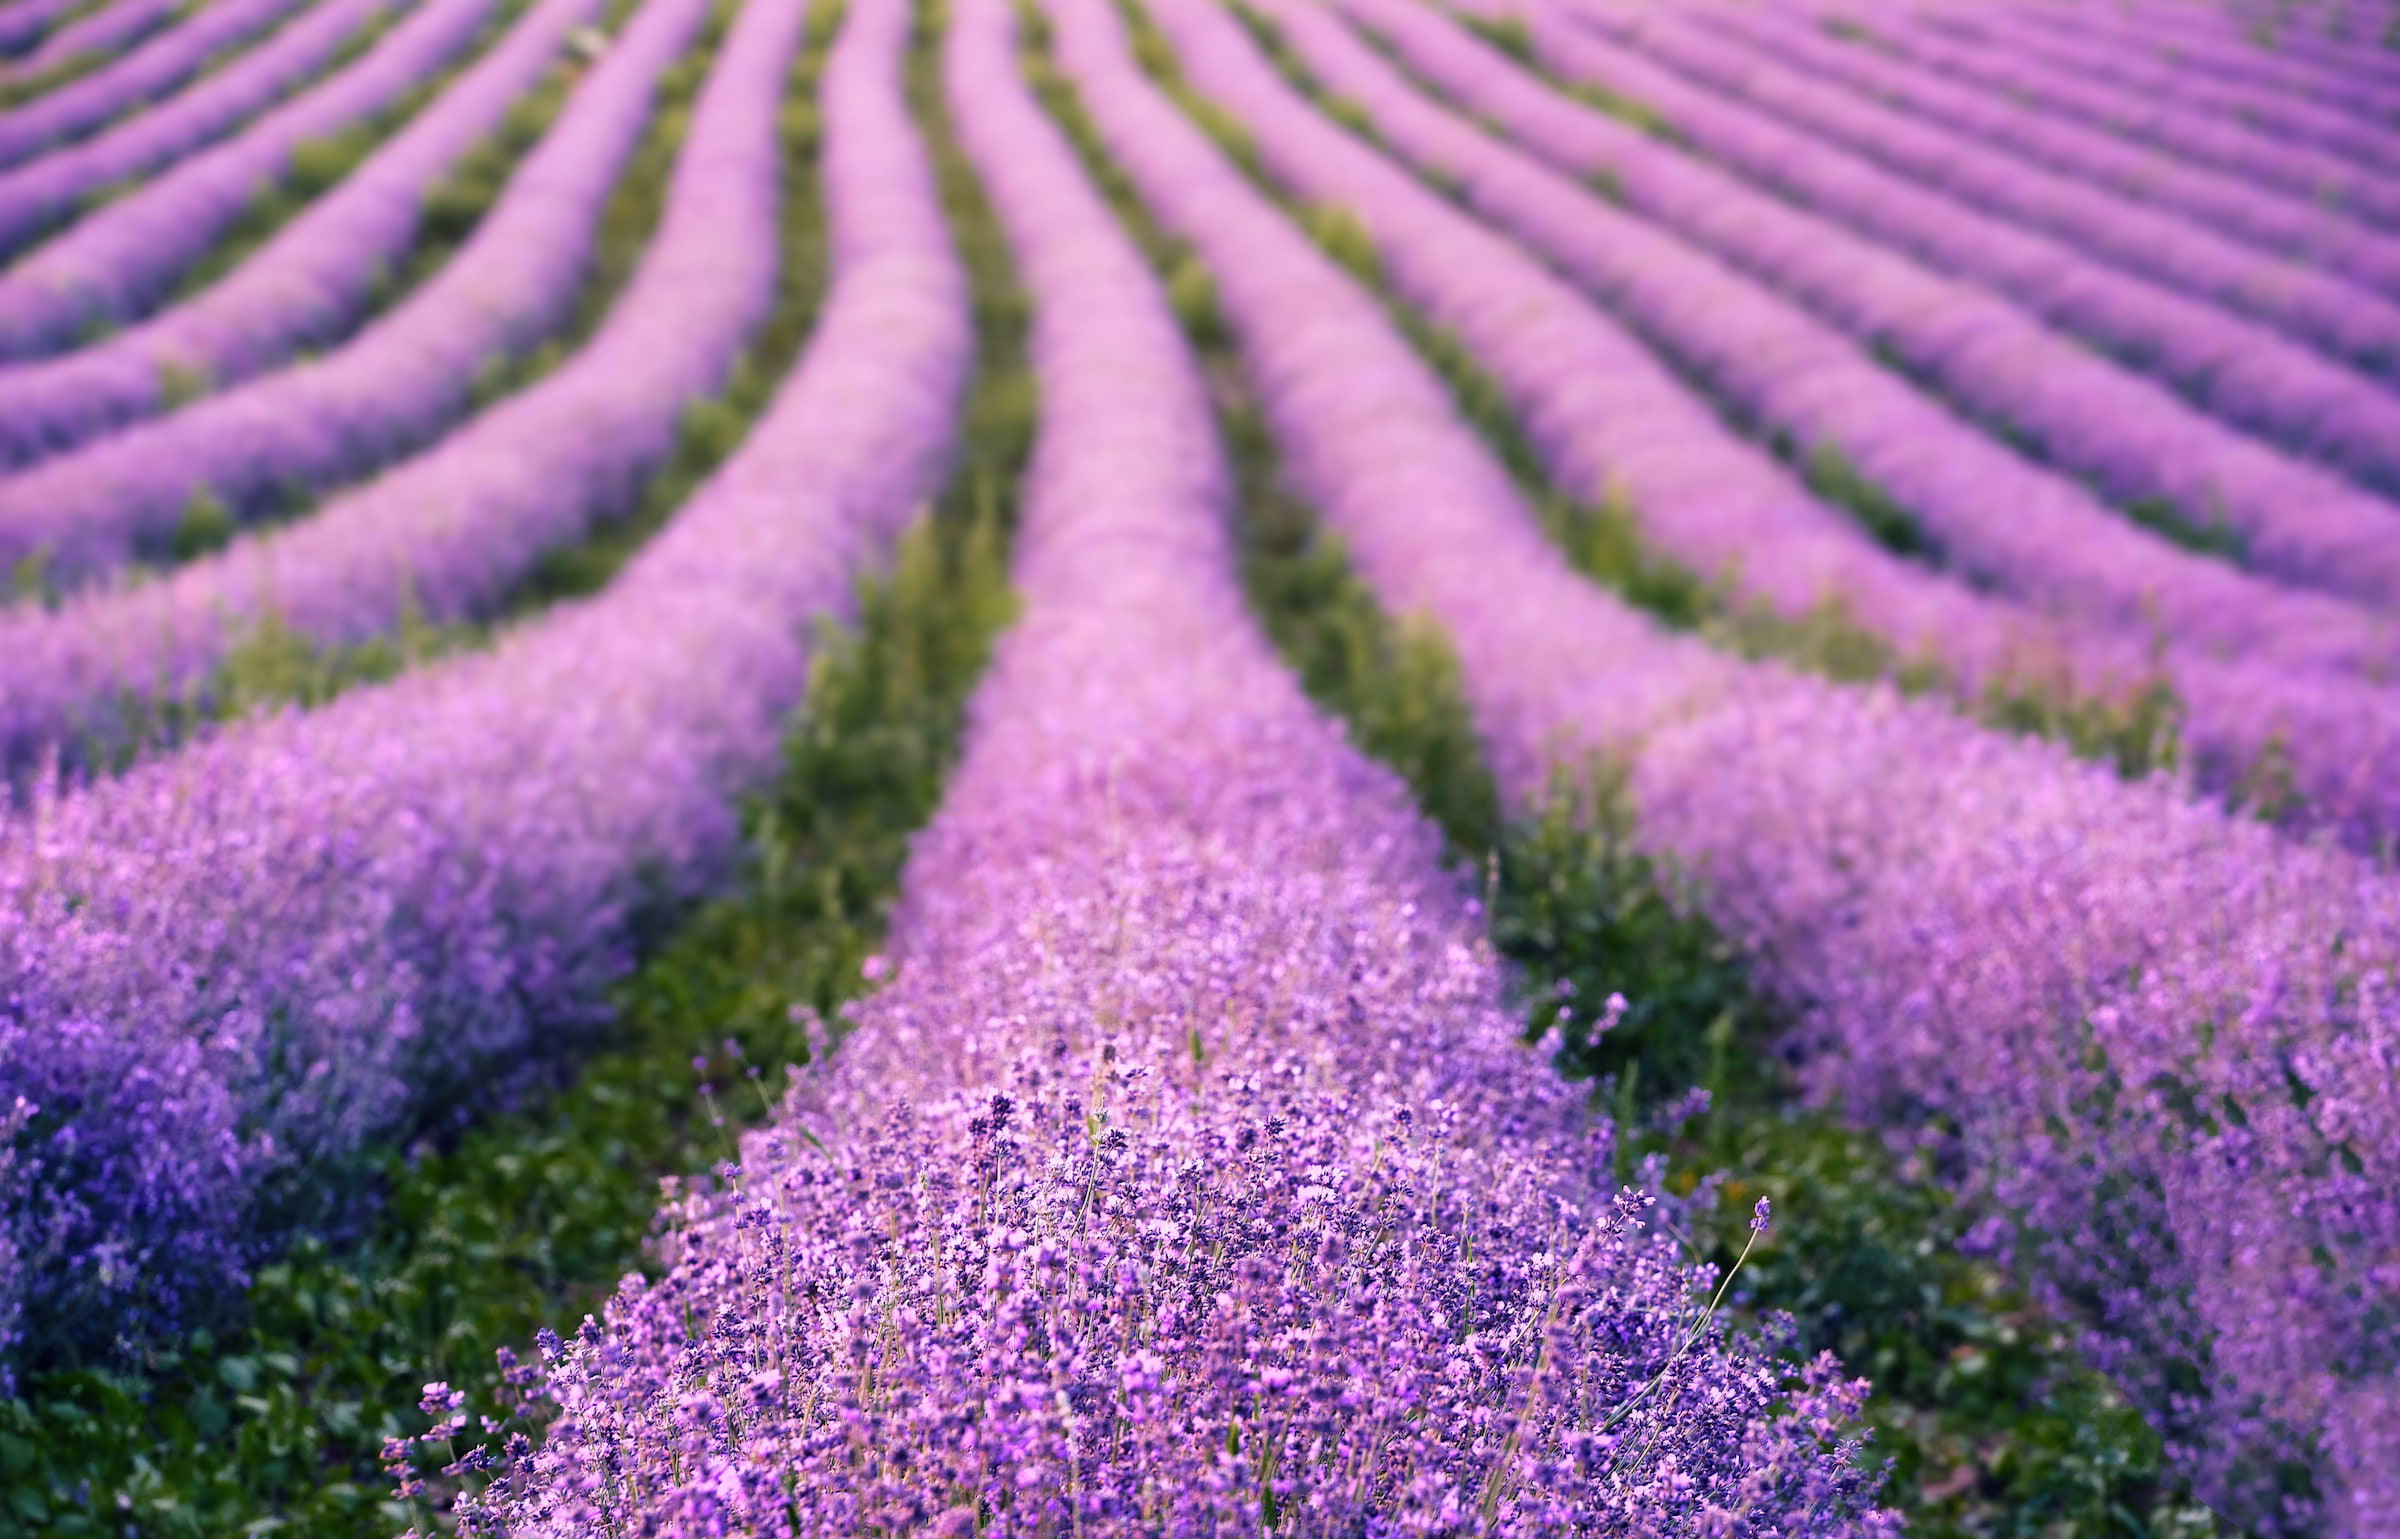 Rows of lavender growing in a field